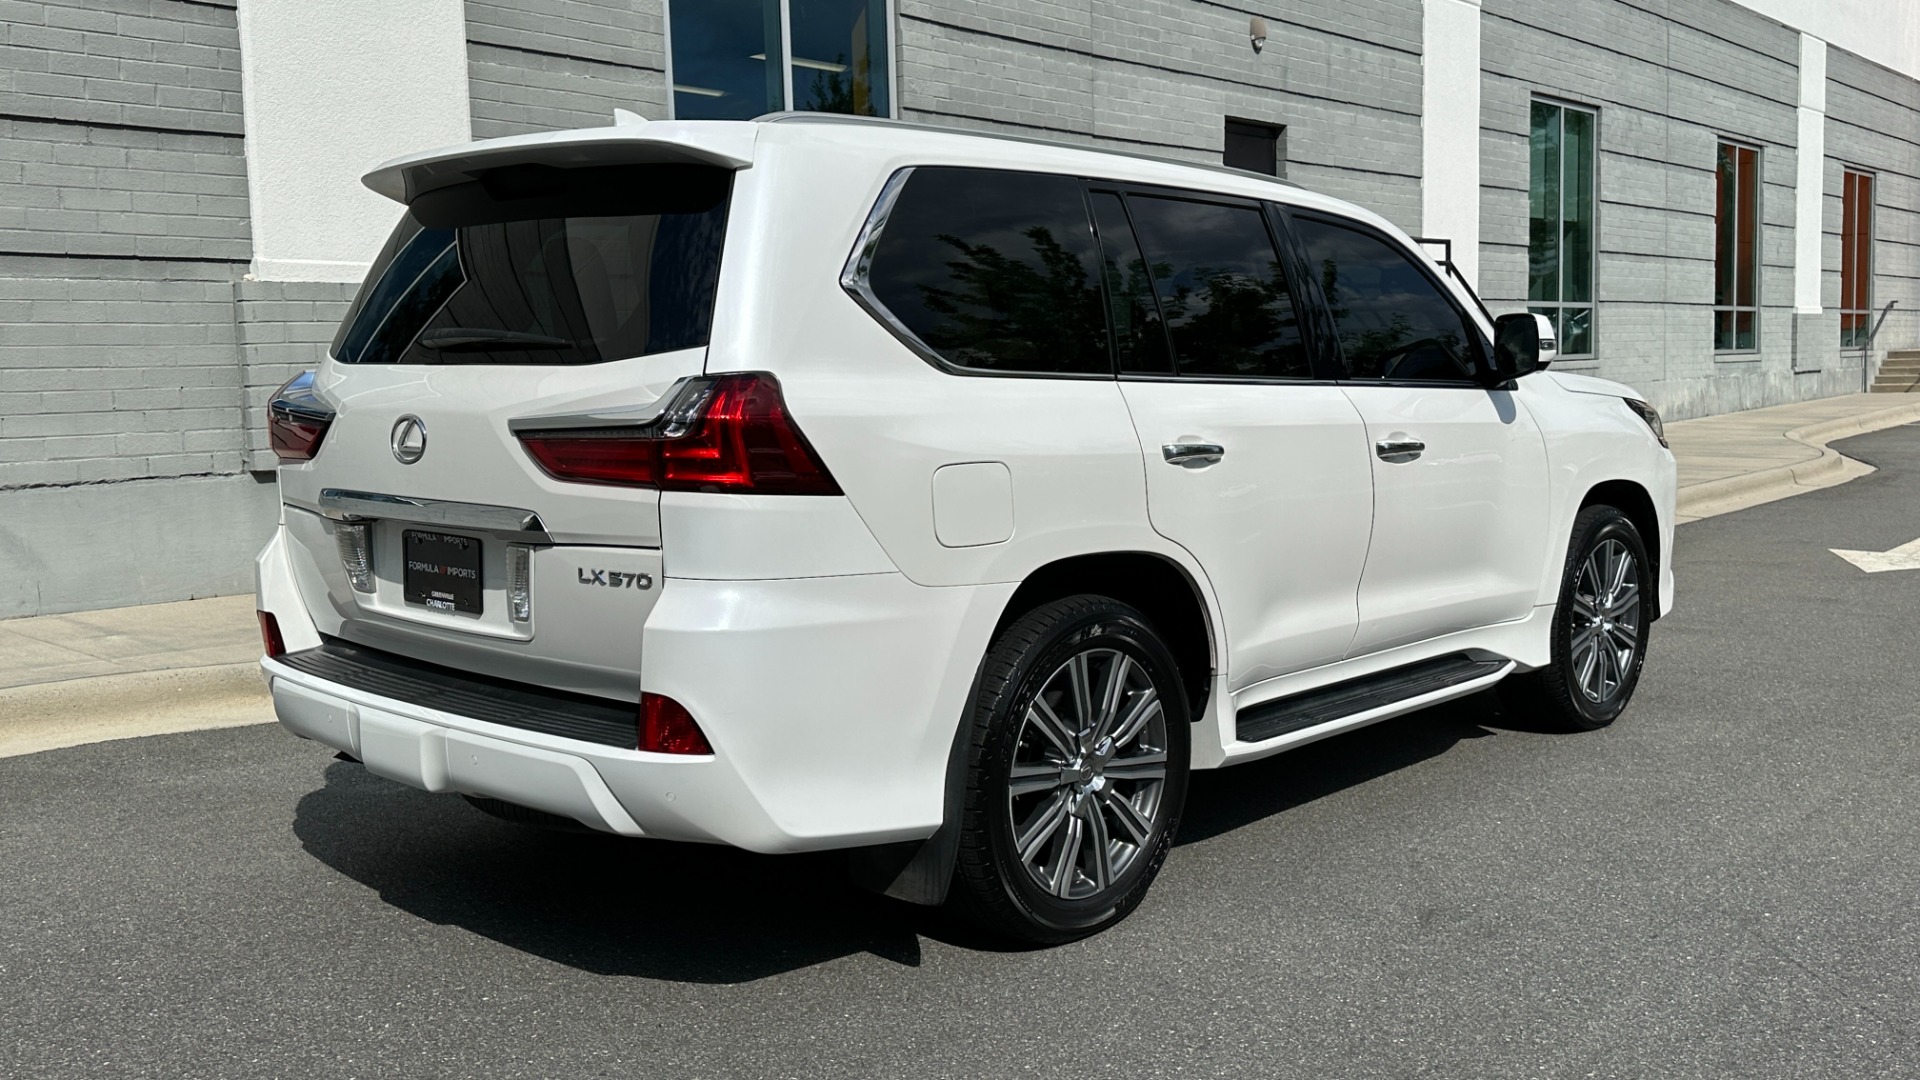 Used 2017 Lexus LX LX 570 LUXURY / MARK LEVINSON / REAR DVD SCREENS / 3 ROW / 4WD for sale $46,995 at Formula Imports in Charlotte NC 28227 4